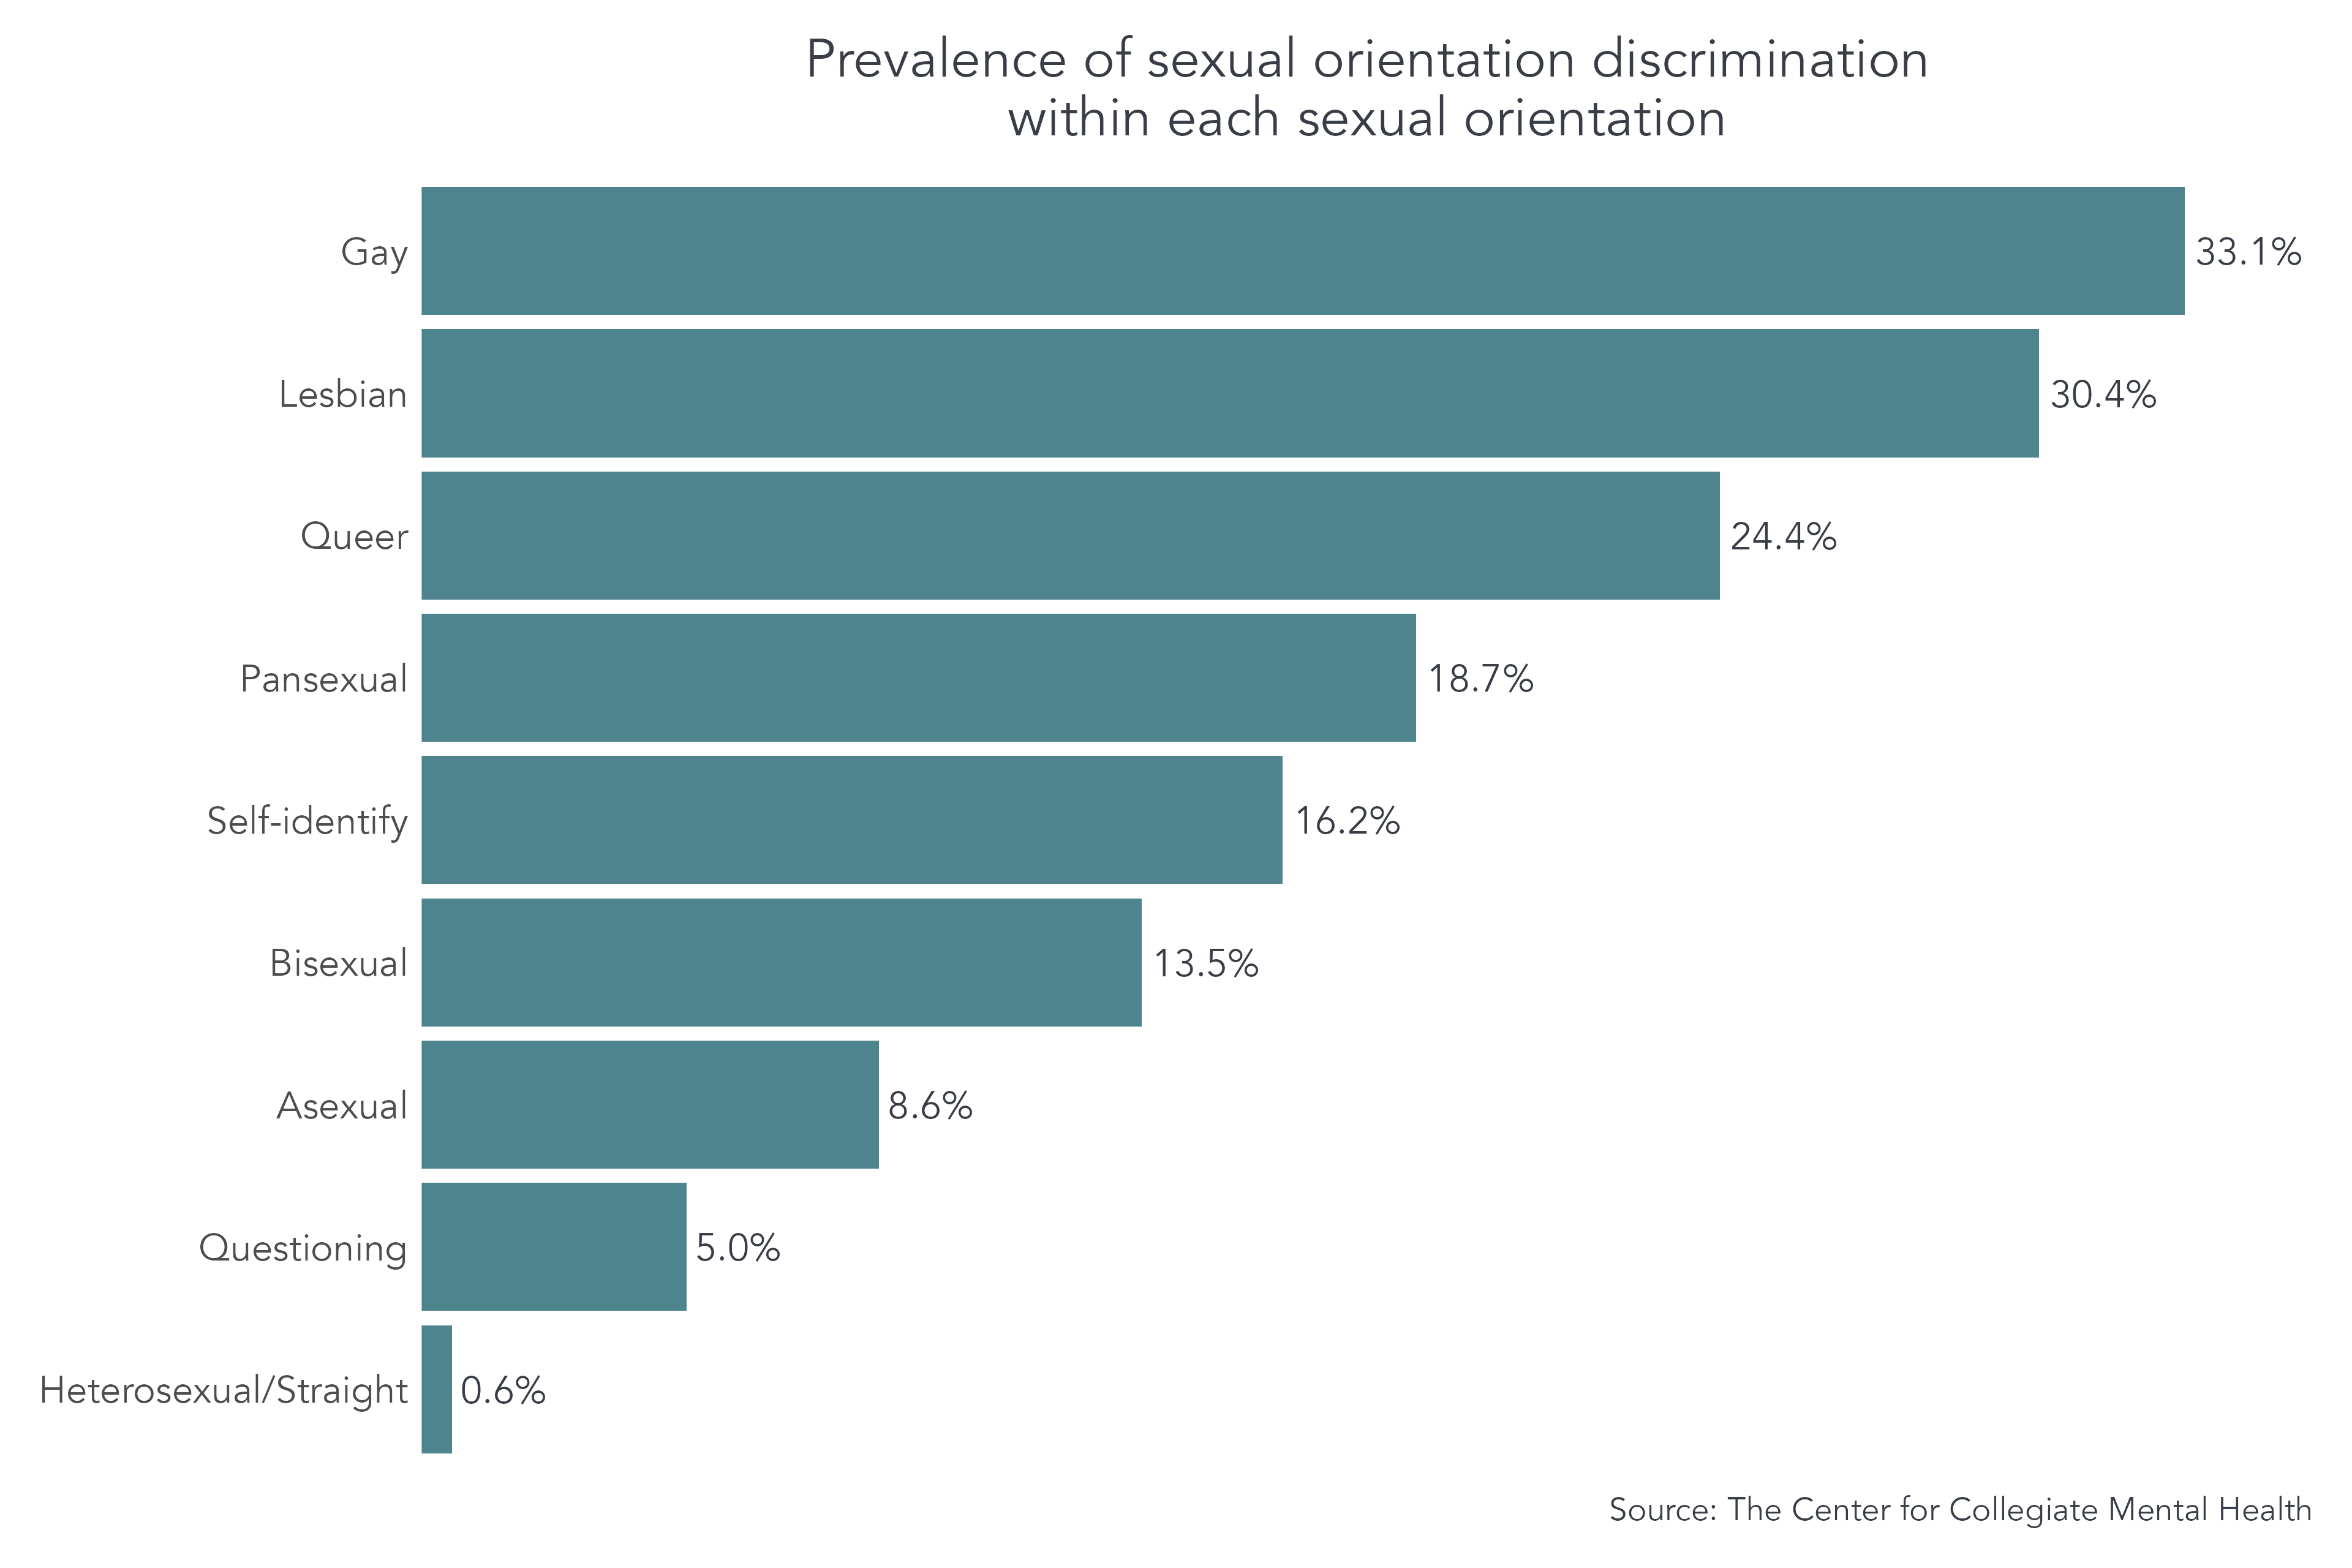 Students who identify as gay and lesbian demonstrated the greatest rates of sexual orientation-based discrimination, with respective rates of 33.1% and 30.4%.  Other diverse sexual identities experienced discrimination rates that ranged from 5.0% (Questioning) to 24.4% (Queer).    